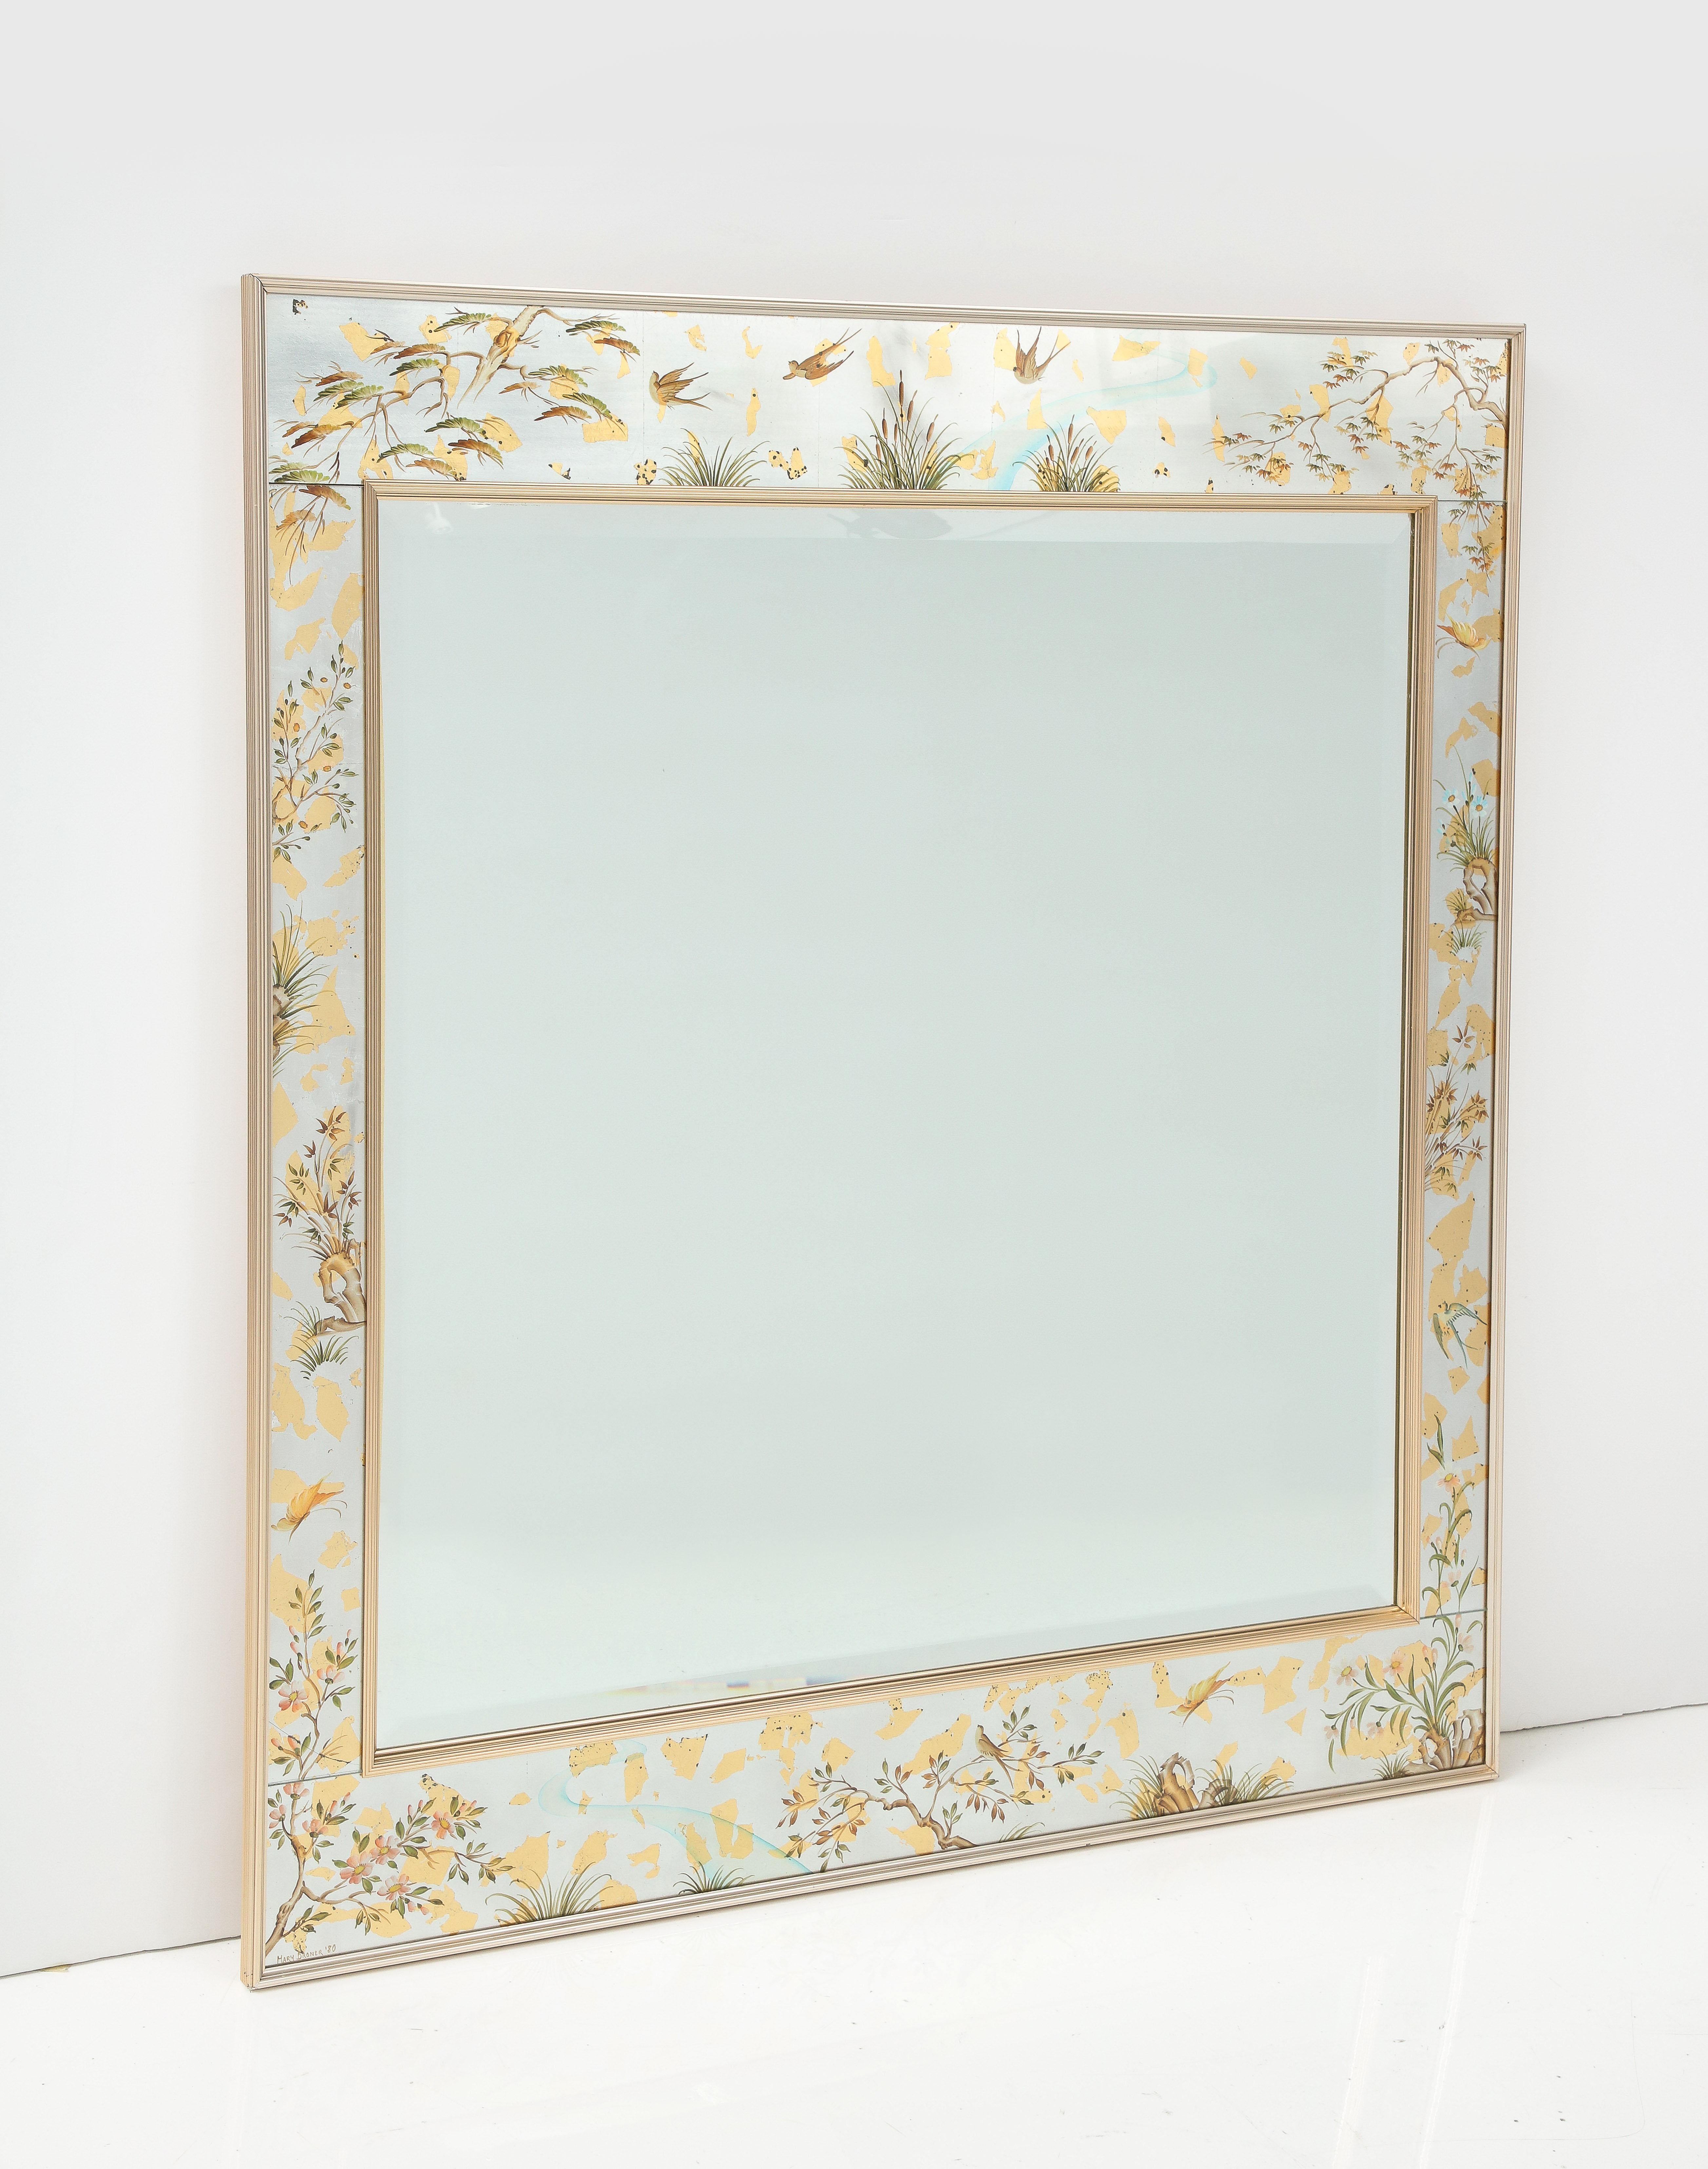 La Barge Chinoiserie, Floral eglomise border beveled mirror. Beveled Mirror surrounded by hand painted and silver leafed panels depicting various trees, plants and stylized birds.